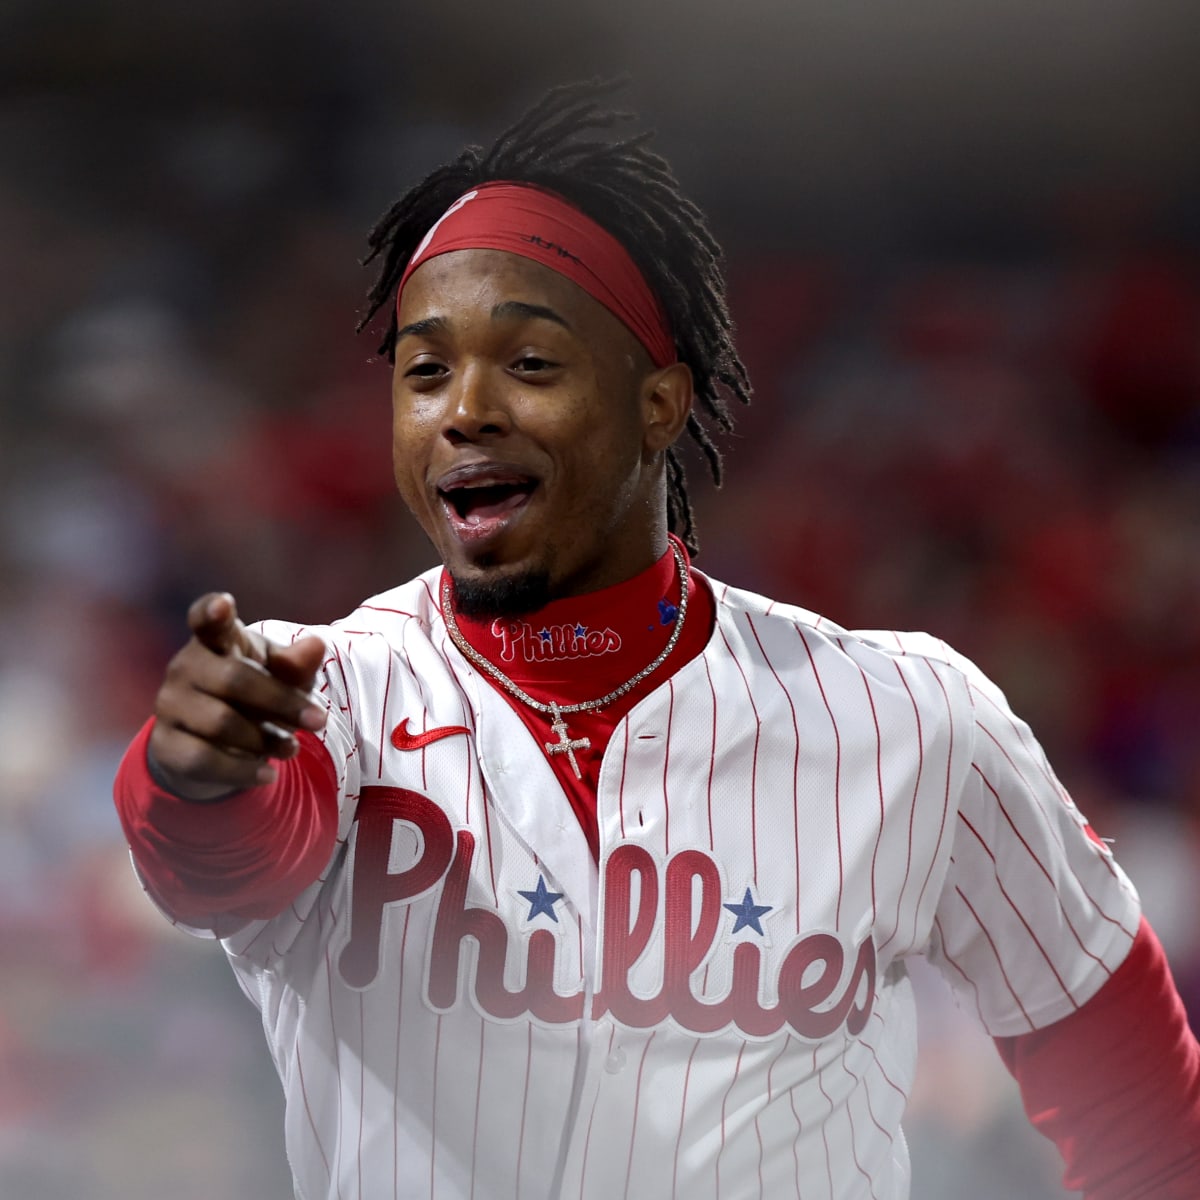 Phillies' Jean Segura not sweating potential All-Star selection or snub